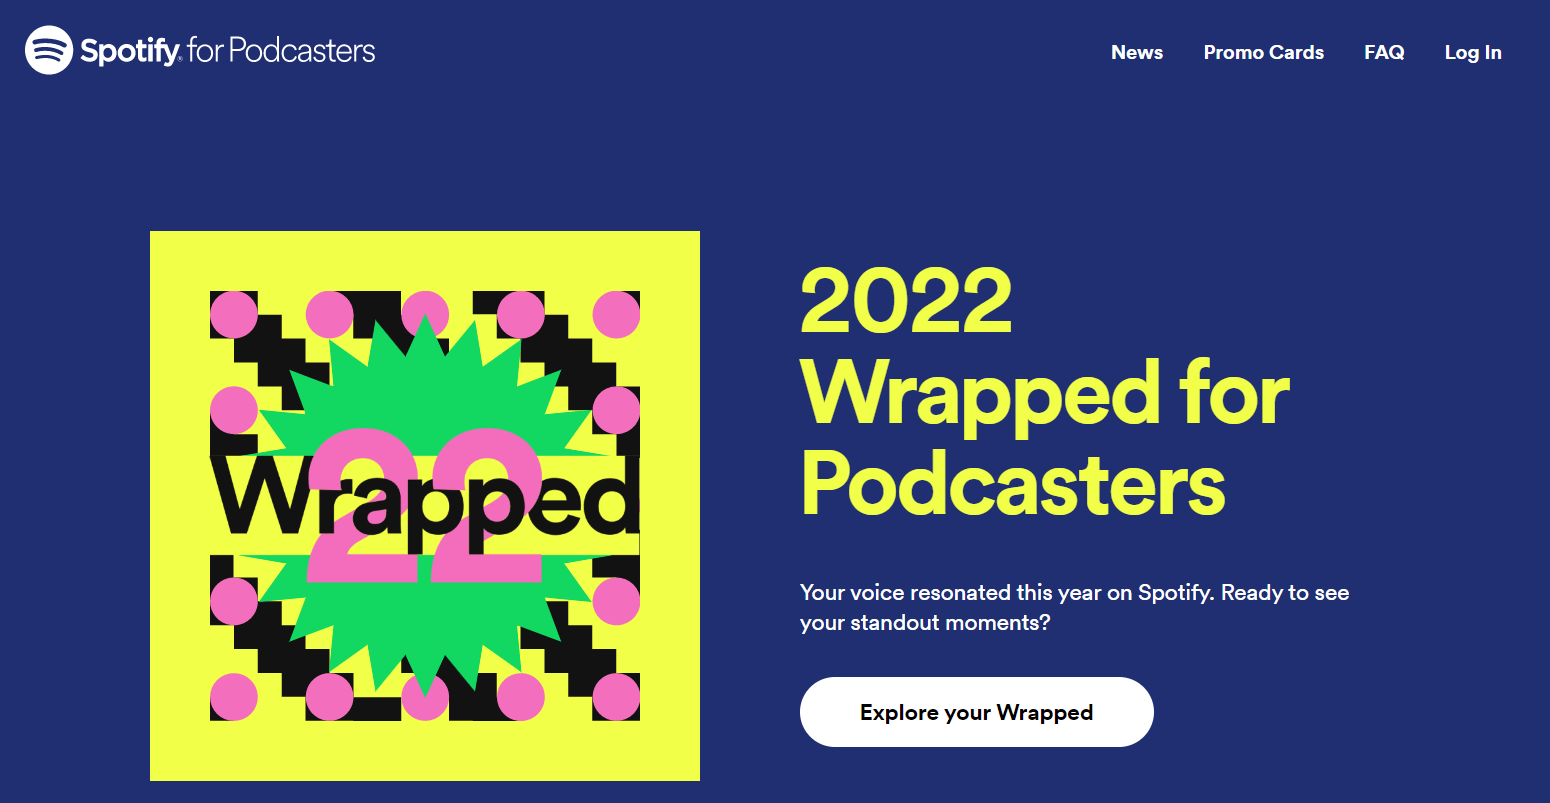 Visit Spotify For Podcasters